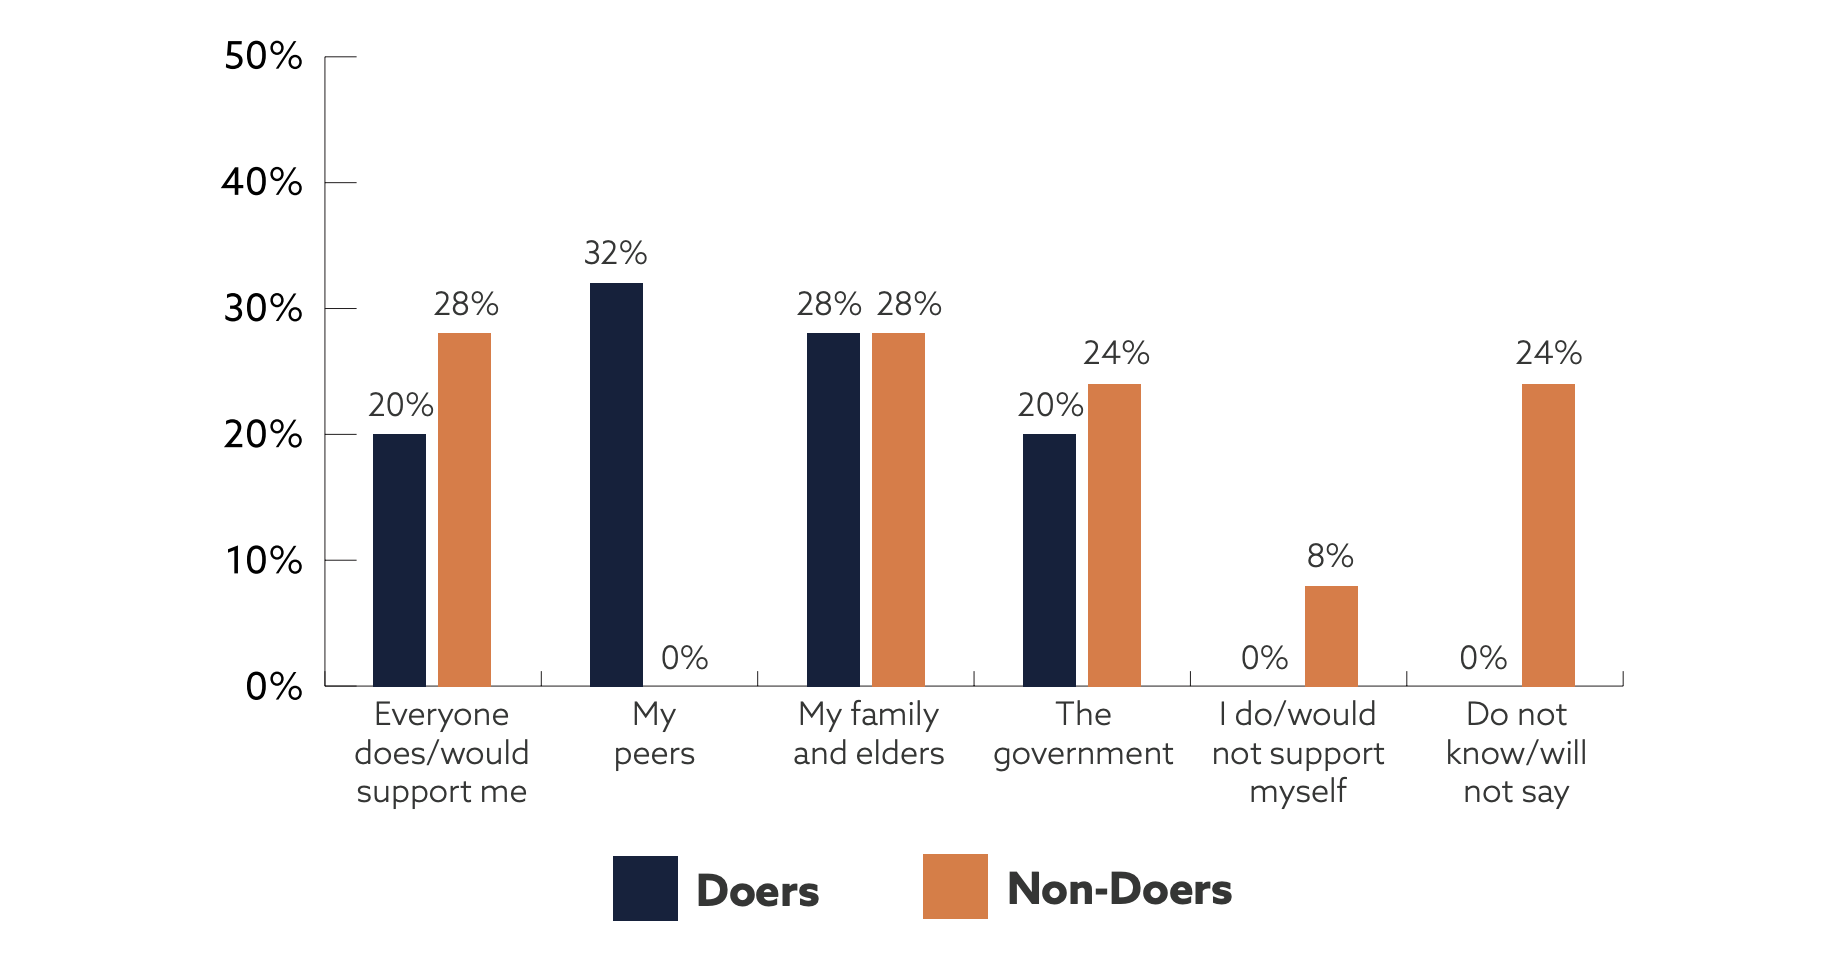 Bar chart.  Doers: Everyone does/would support me 20%; My peers 32%; My family and elders 28%; The government 20%; I do/would not support myself 0%; Do not know/will not say 0%.  Non-doers:  Everyone does/would support me 28%; My peers 0%; My family and elders 28%; The government 24%; I do/would not support myself 8%; Do not know/will not say 24%. 